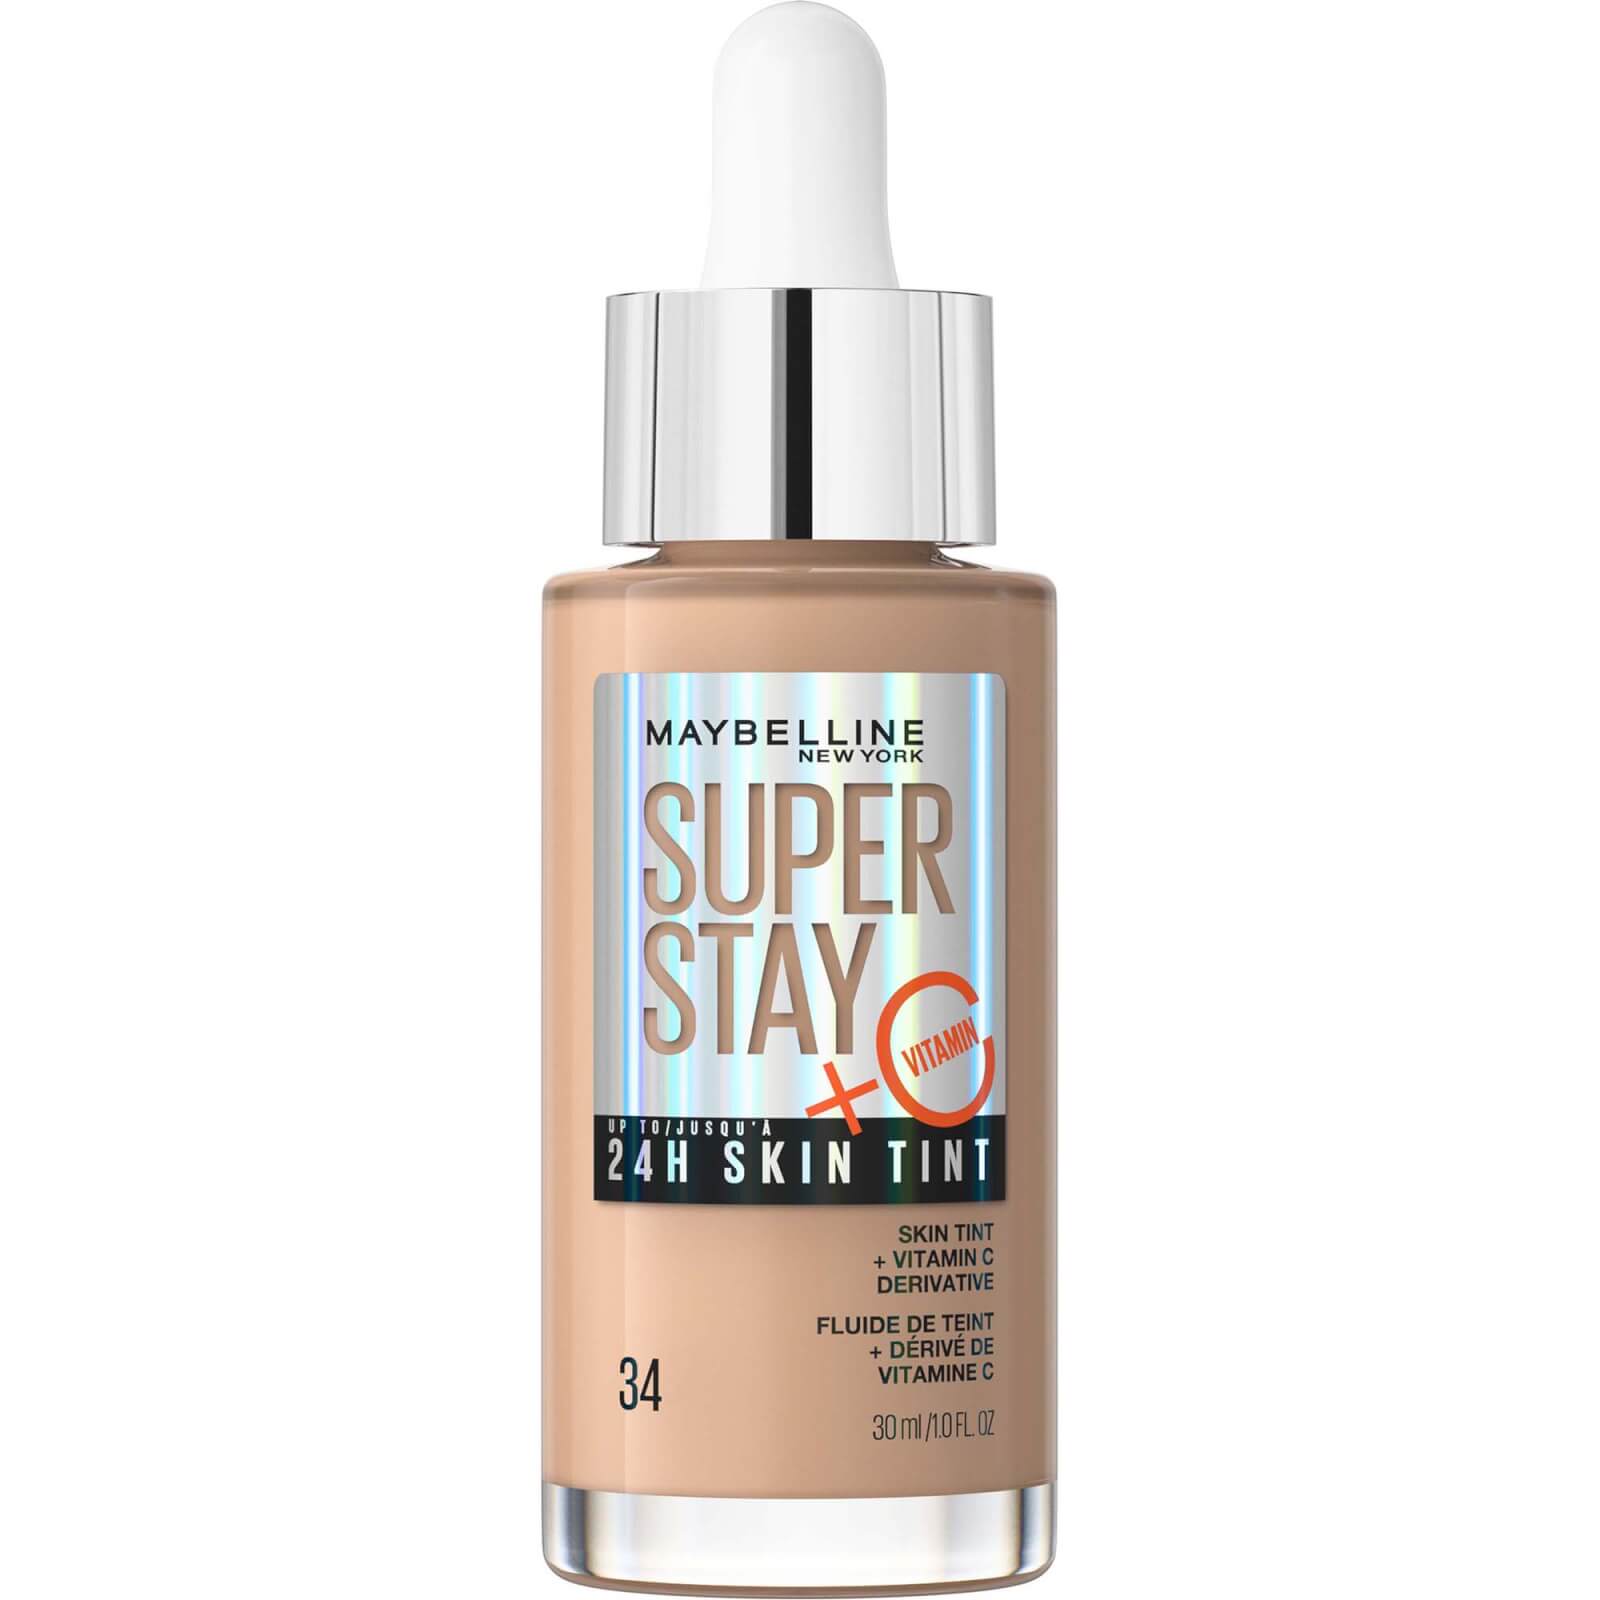 Maybelline Super Stay Up To 24h Skin Tint Foundation + Vitamin C 30ml (various Shades) - 34 In Neutral